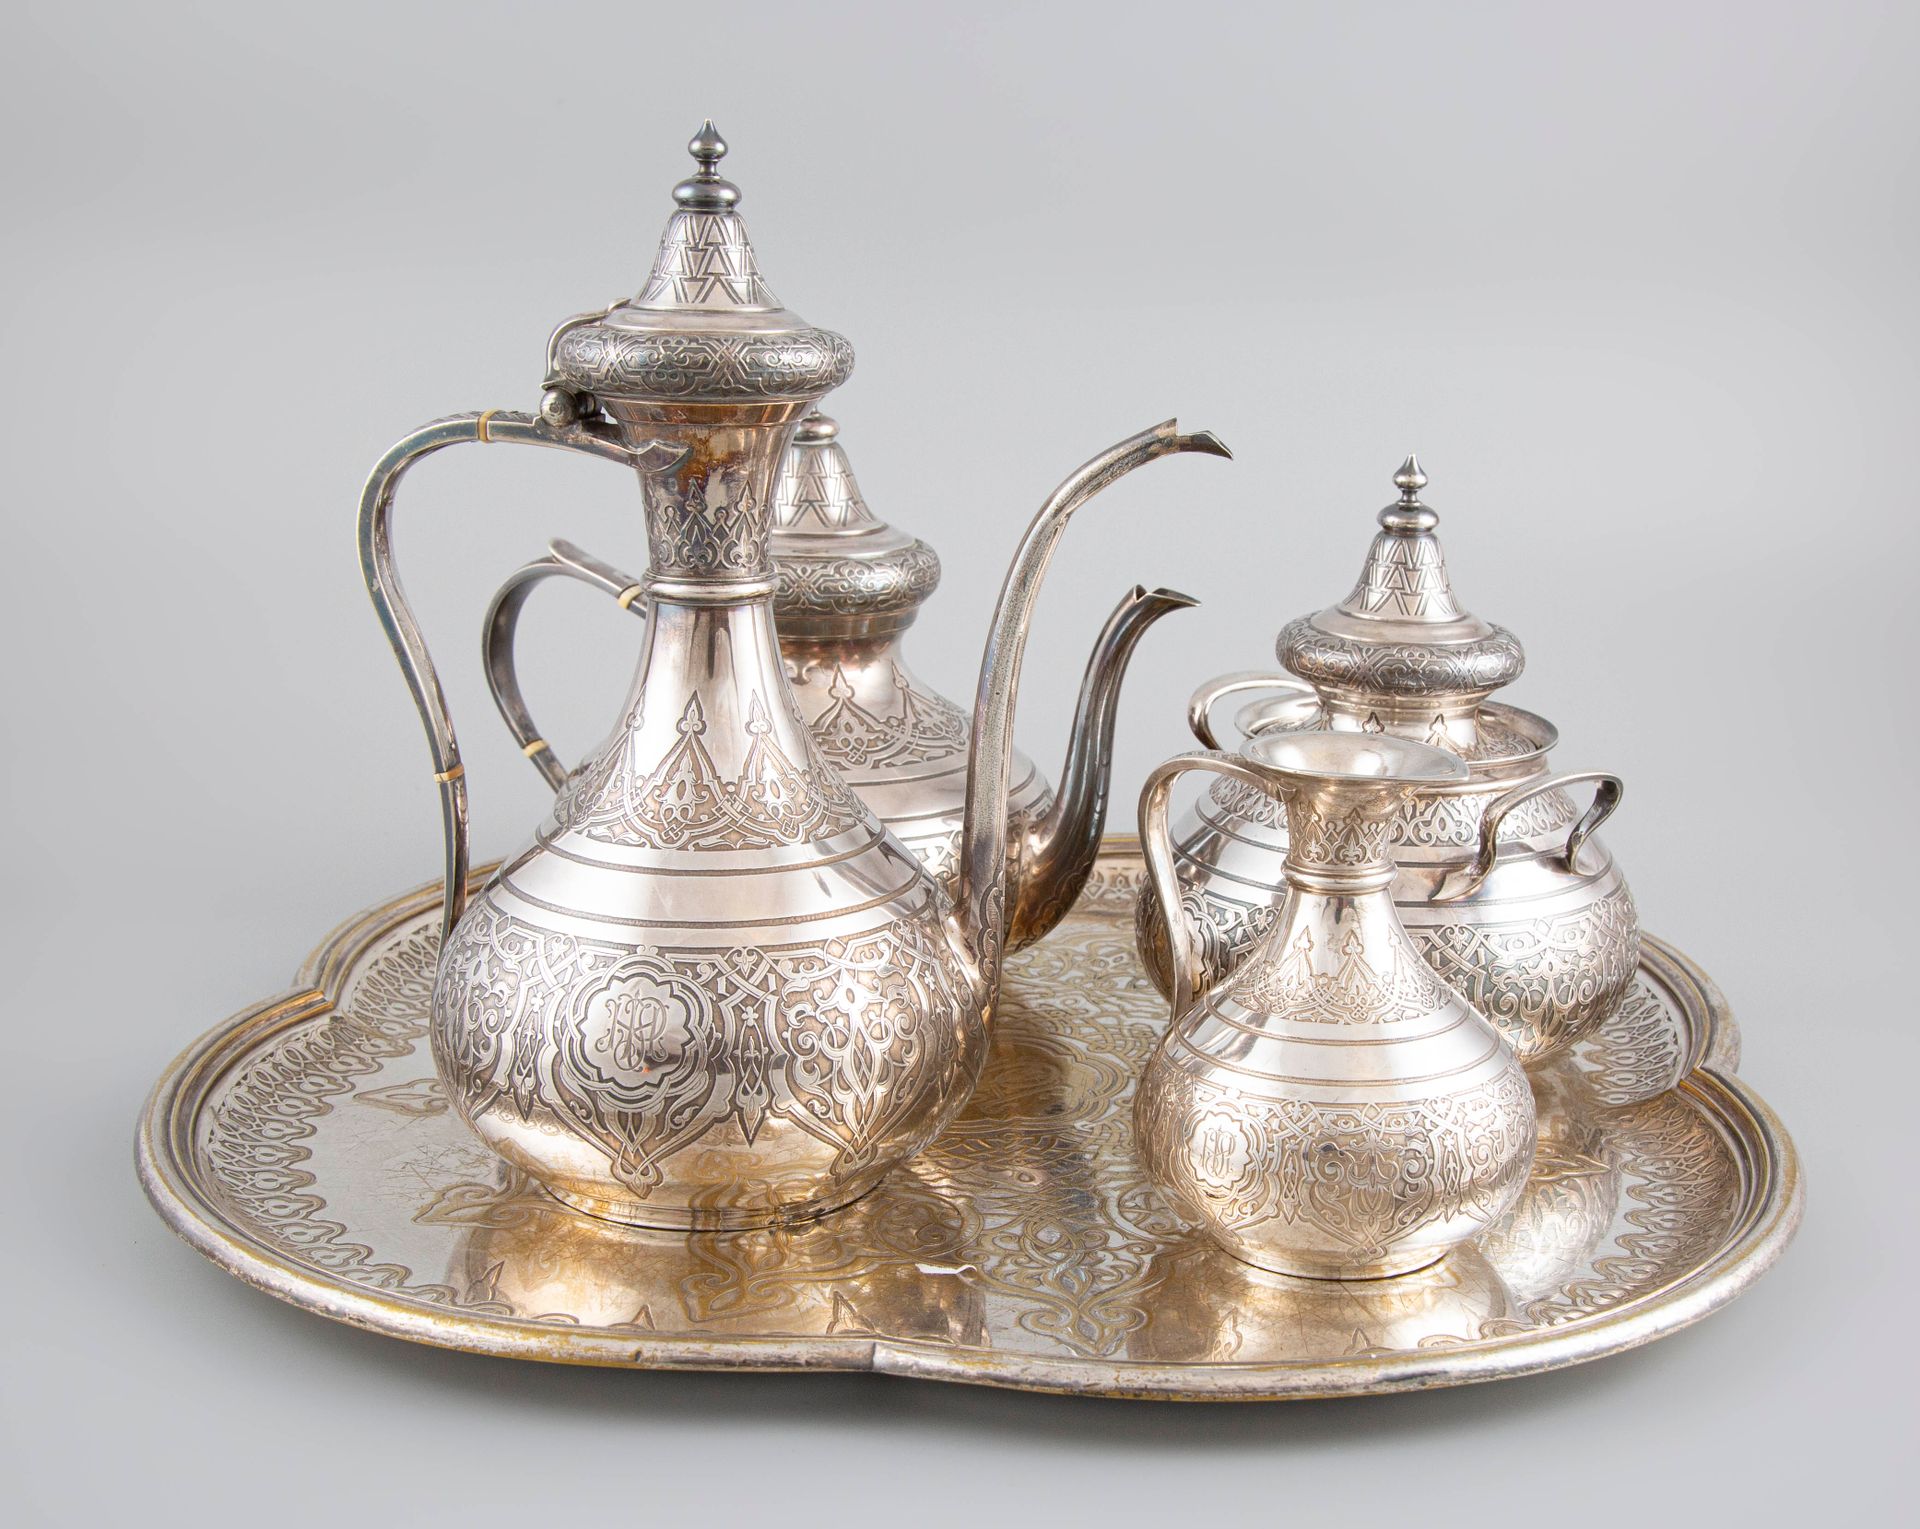 Null Silvered bronze service of 5 pieces including 1 tray, 1 teapot, 1 coffee po&hellip;